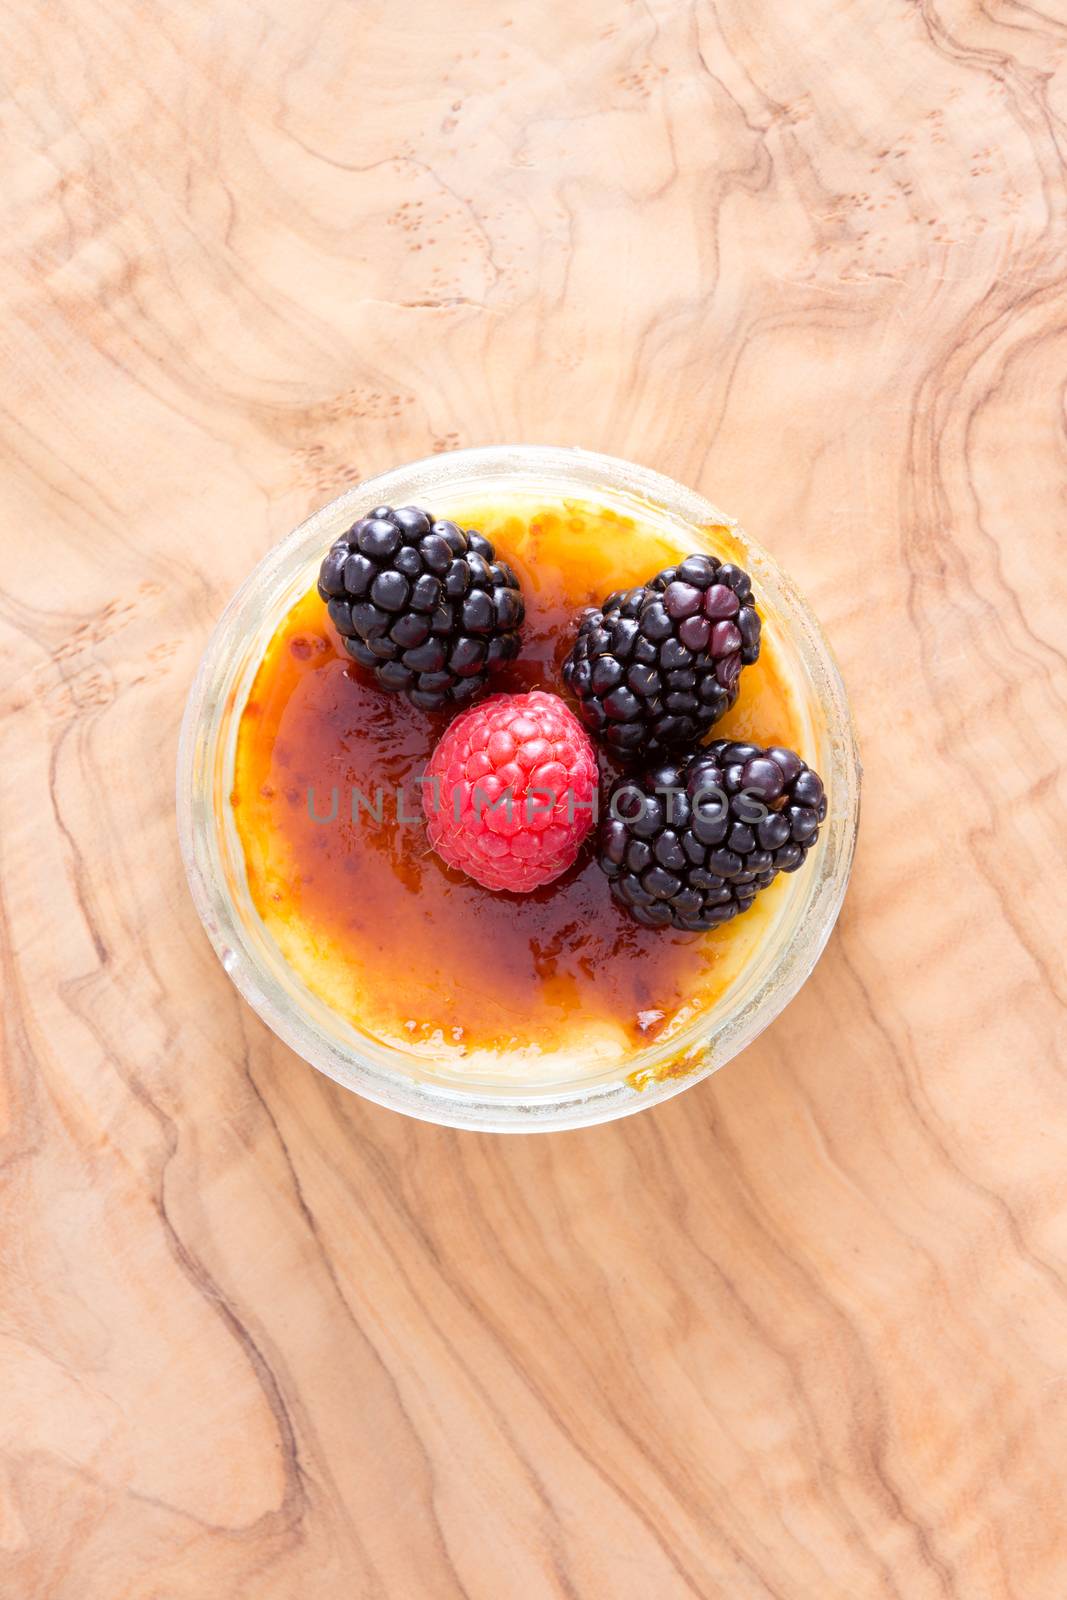 Above view of single little bowl full with custard dessert and toppings of black and red raspberries over wooden surface